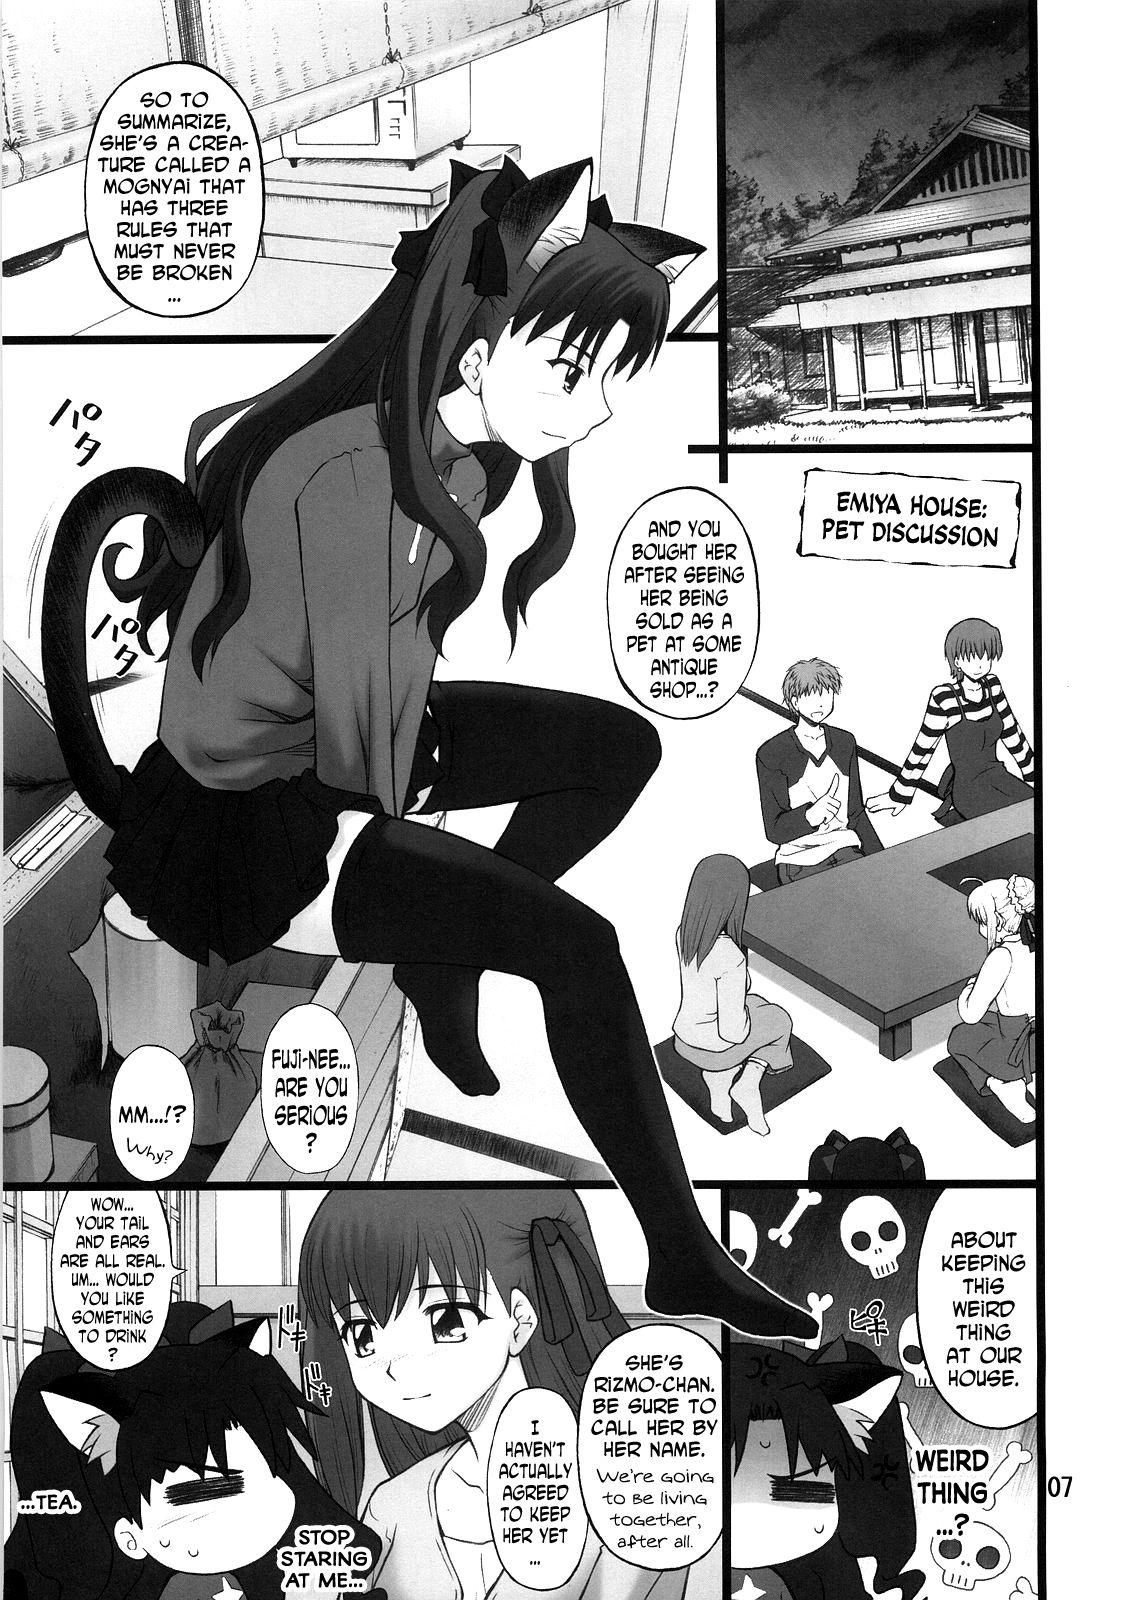 Ass Fetish Grem-Rin 1 - Fate stay night Hermana - Page 6